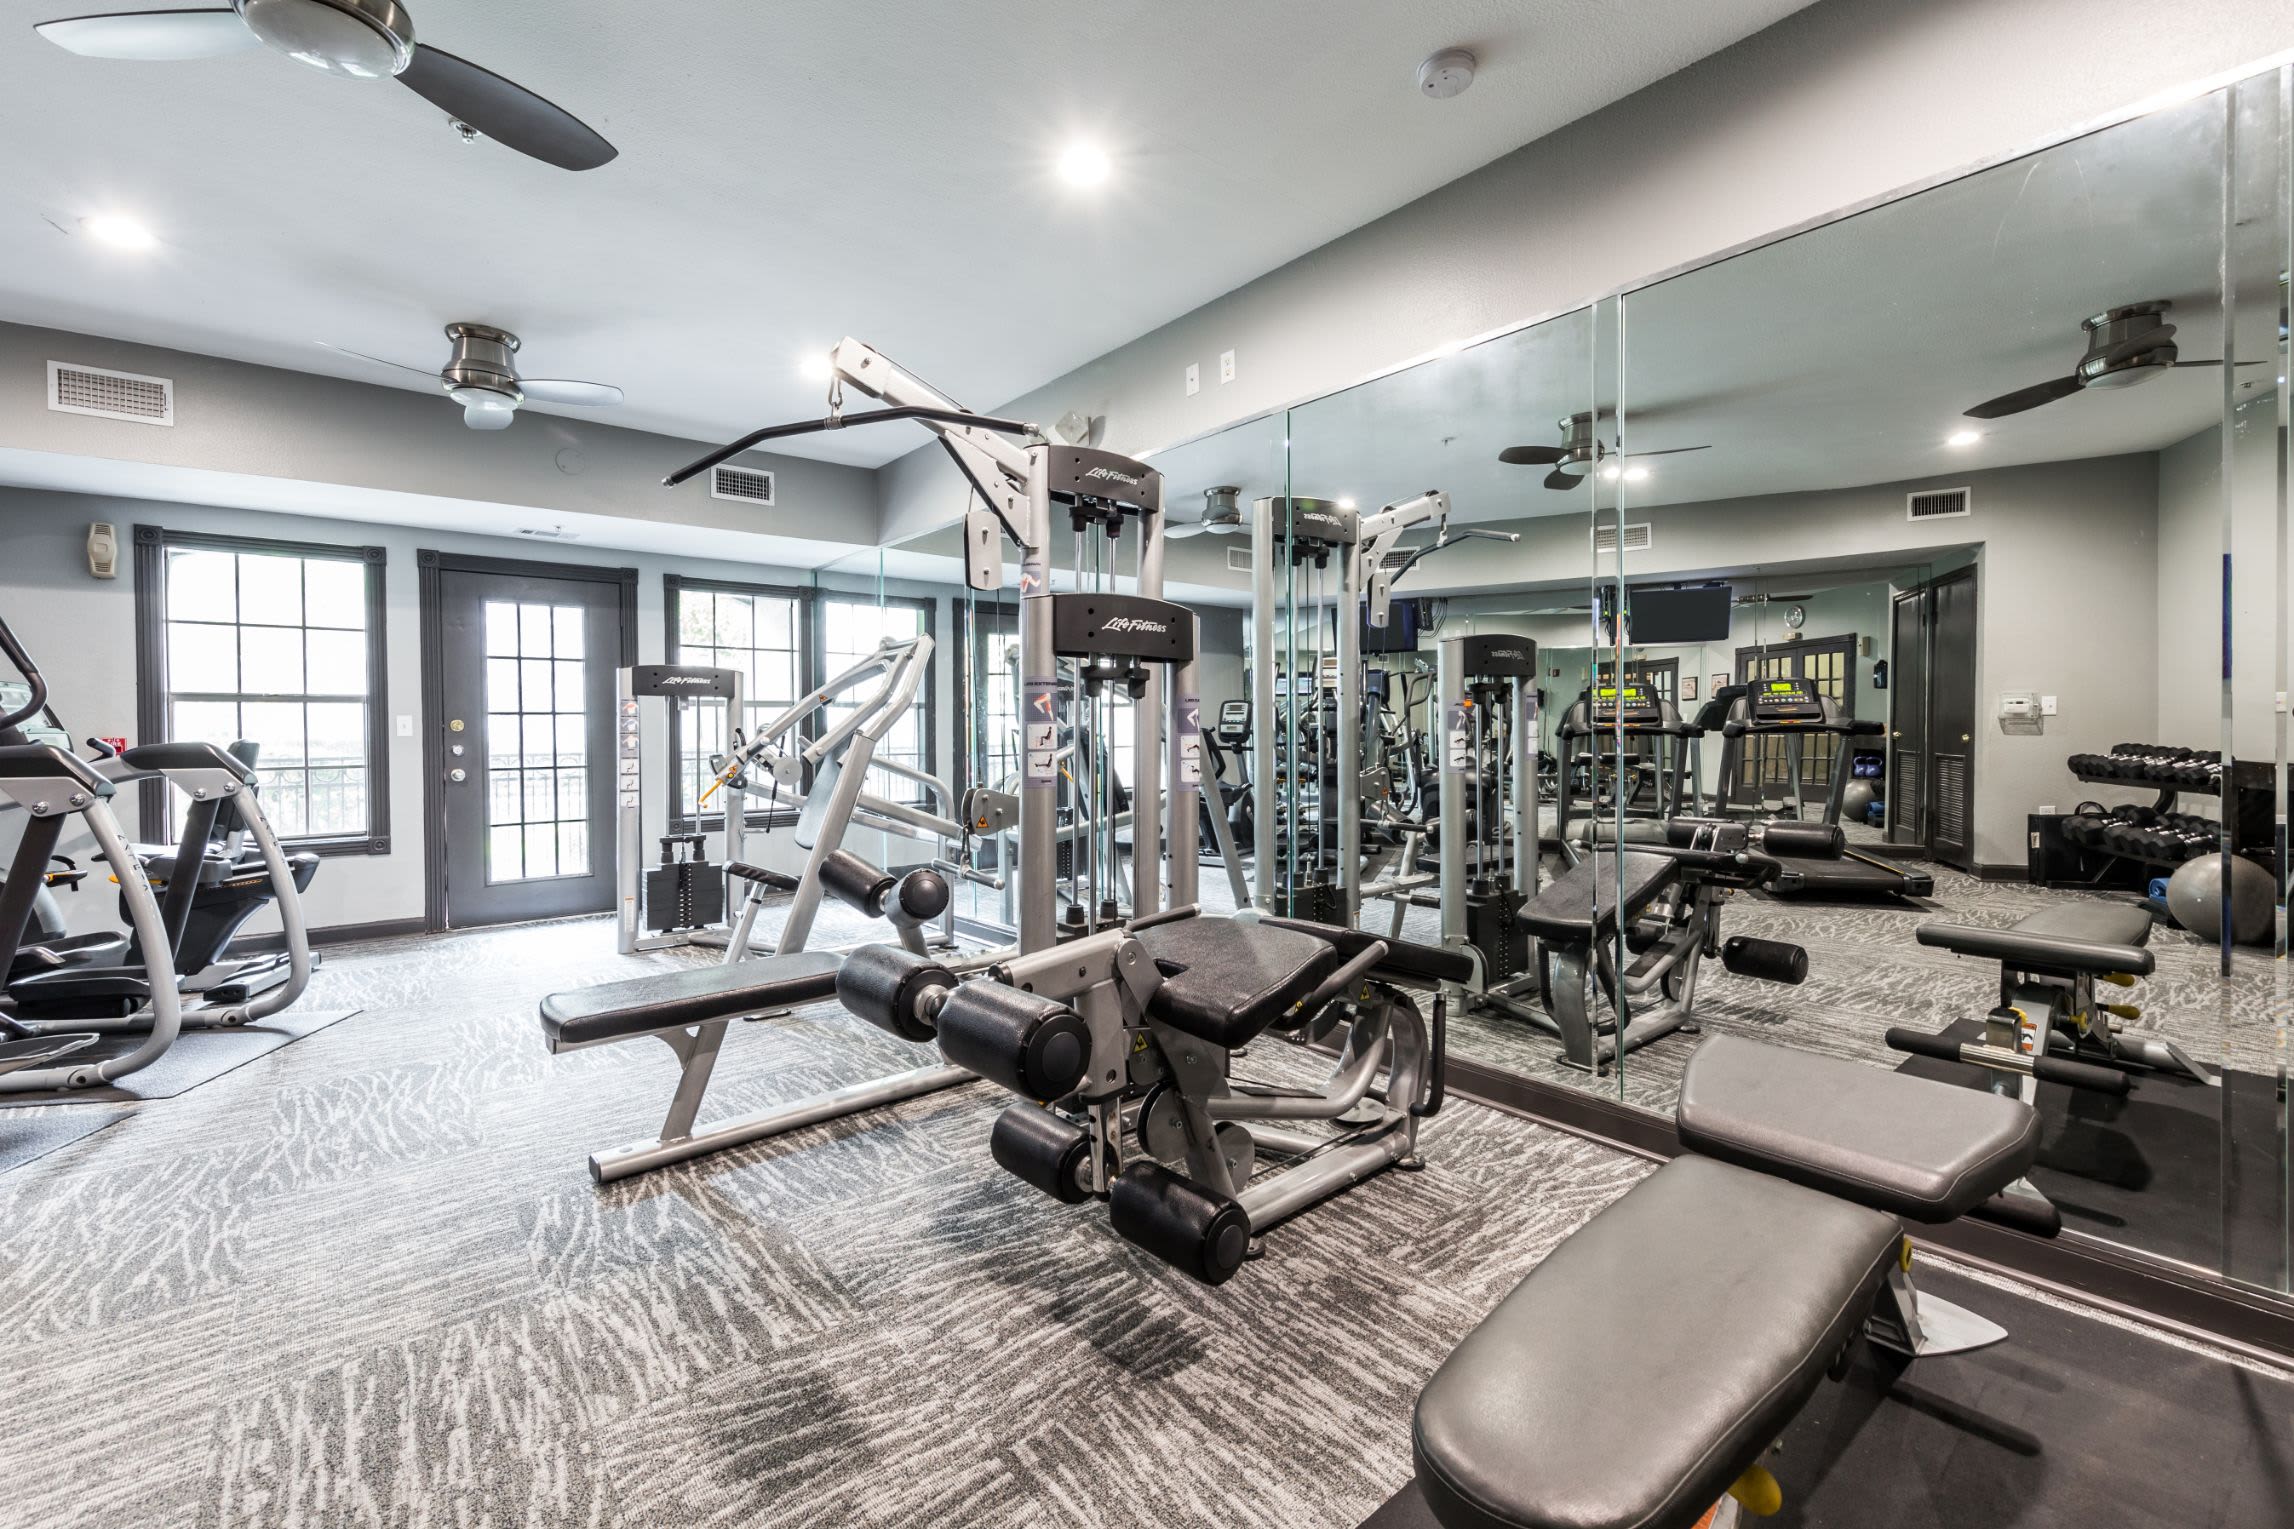 Fitness center at Marquis at Tanglewood in Houston, Texas